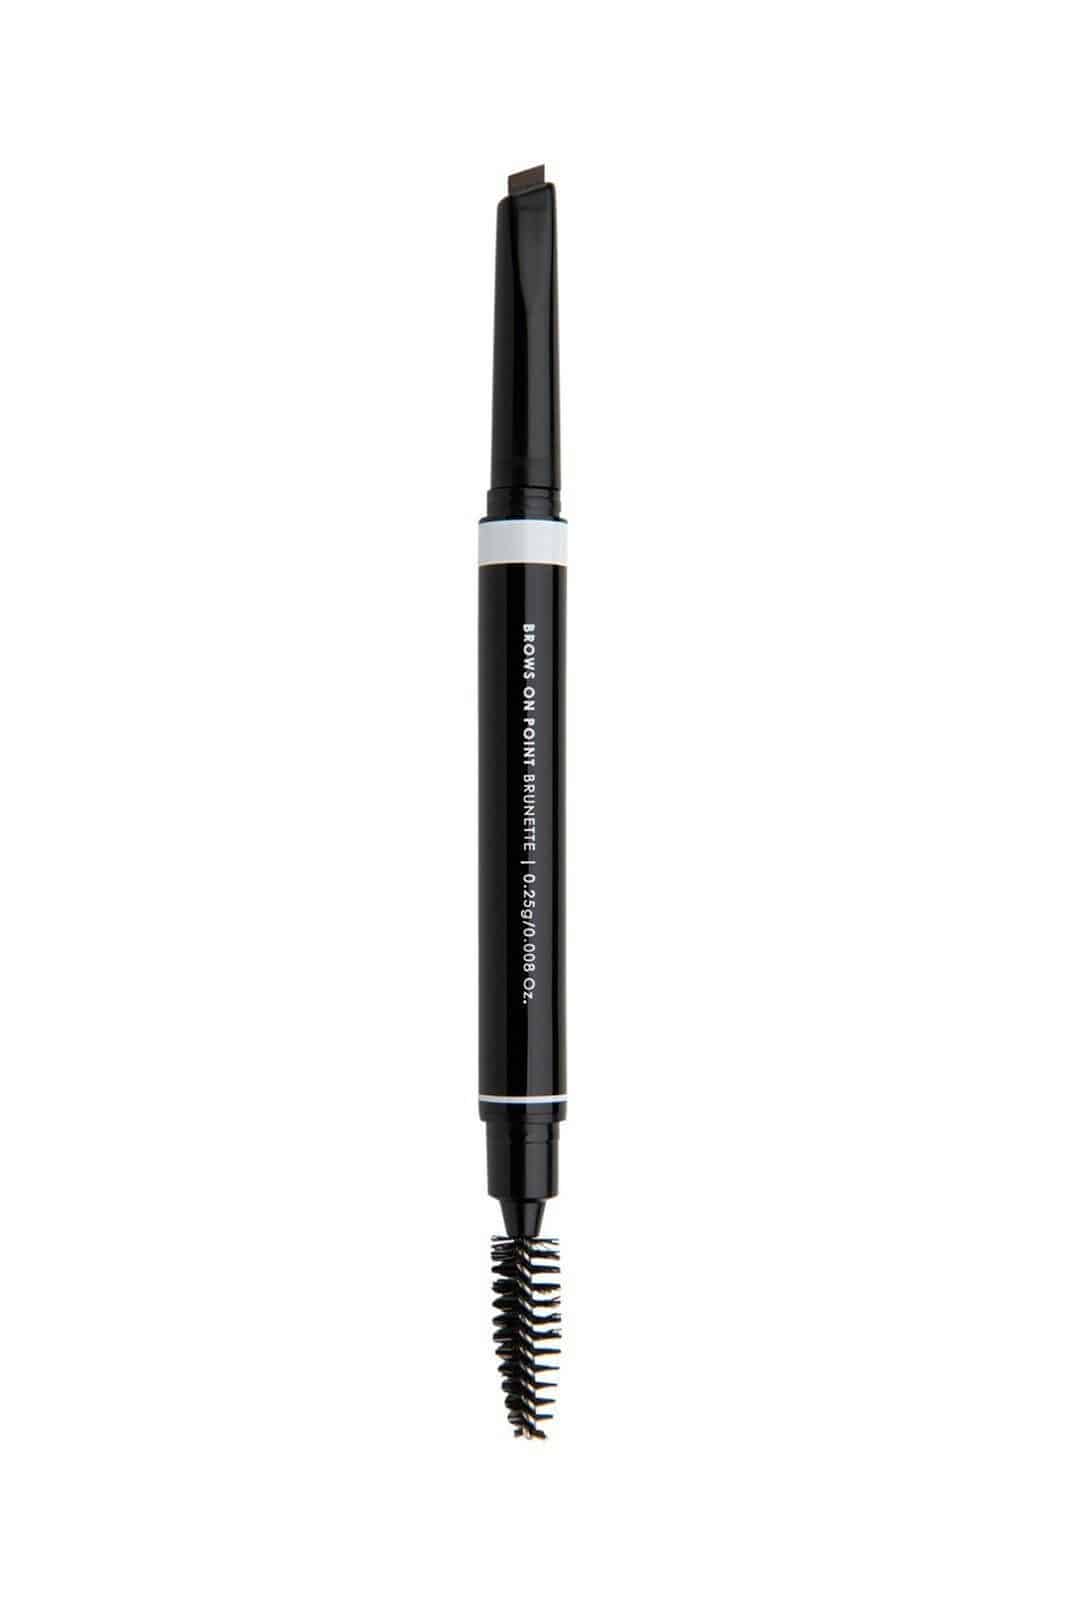 Garbo & Kelly Brunette - Brows on Point x 1  Brow Pencil - On Line Hair Depot